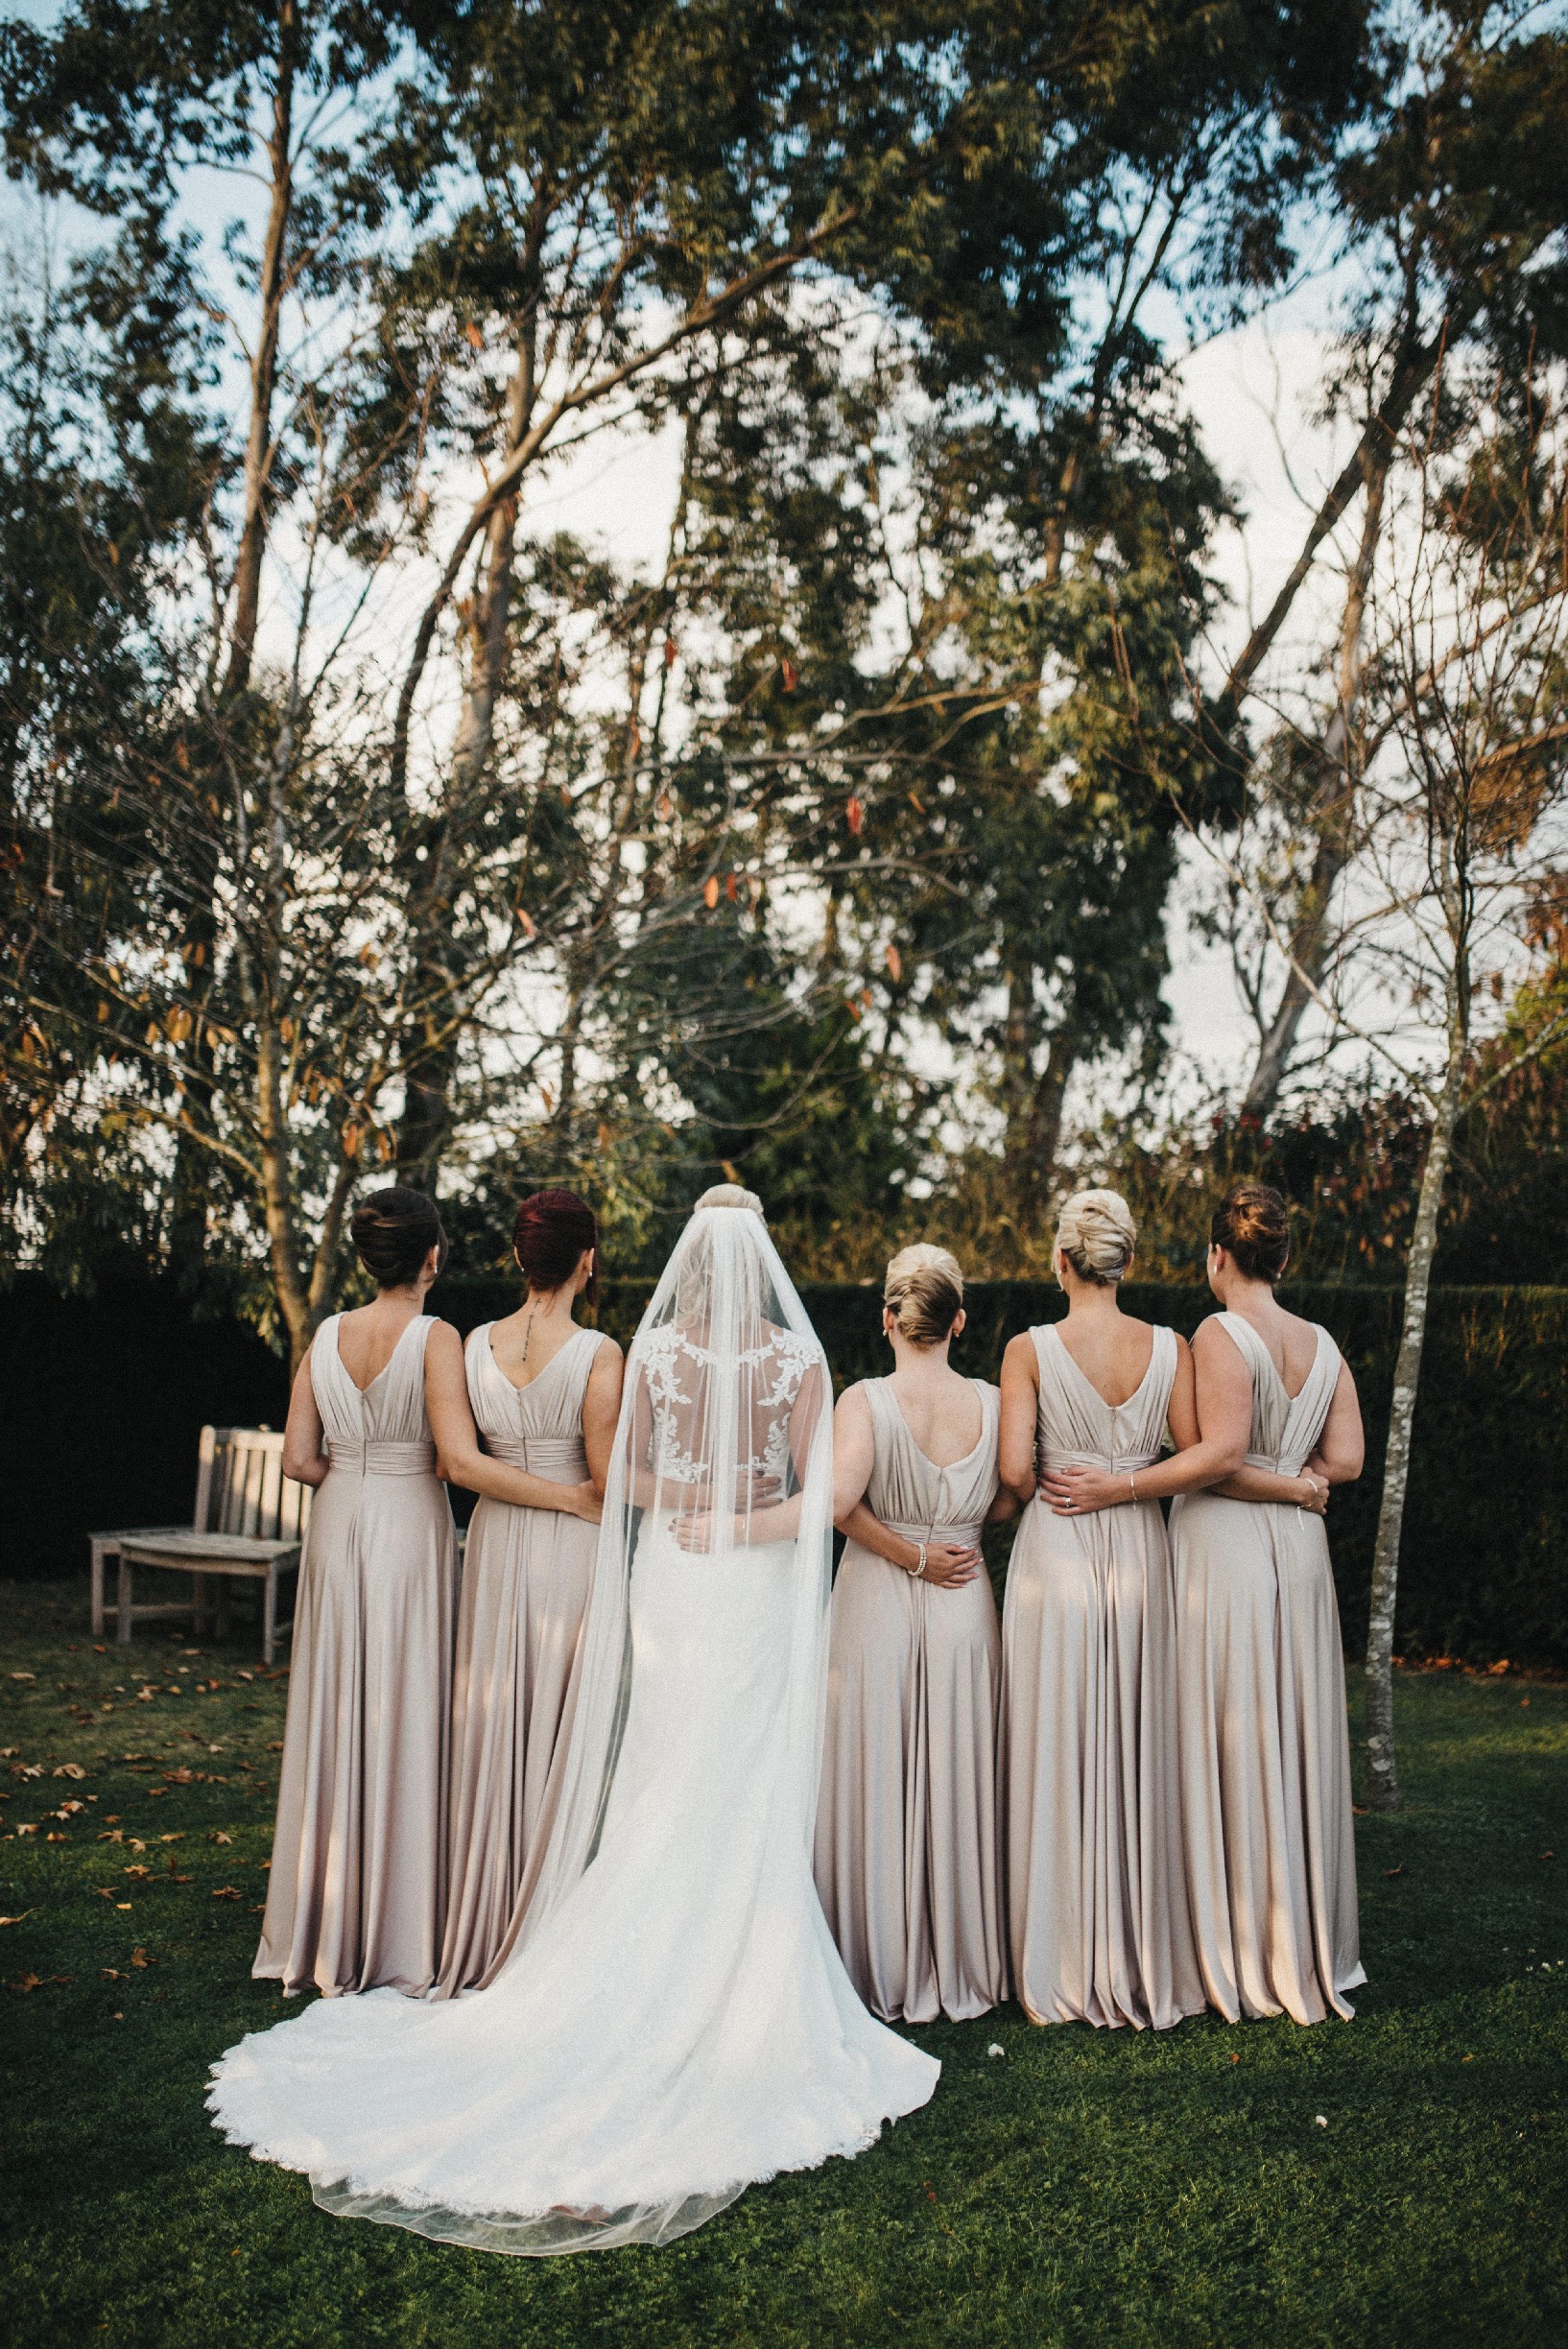 rear profile of a bride wearing an ivory dress and veil with 5 bridesmaids in taupe dresses stood outside near trees